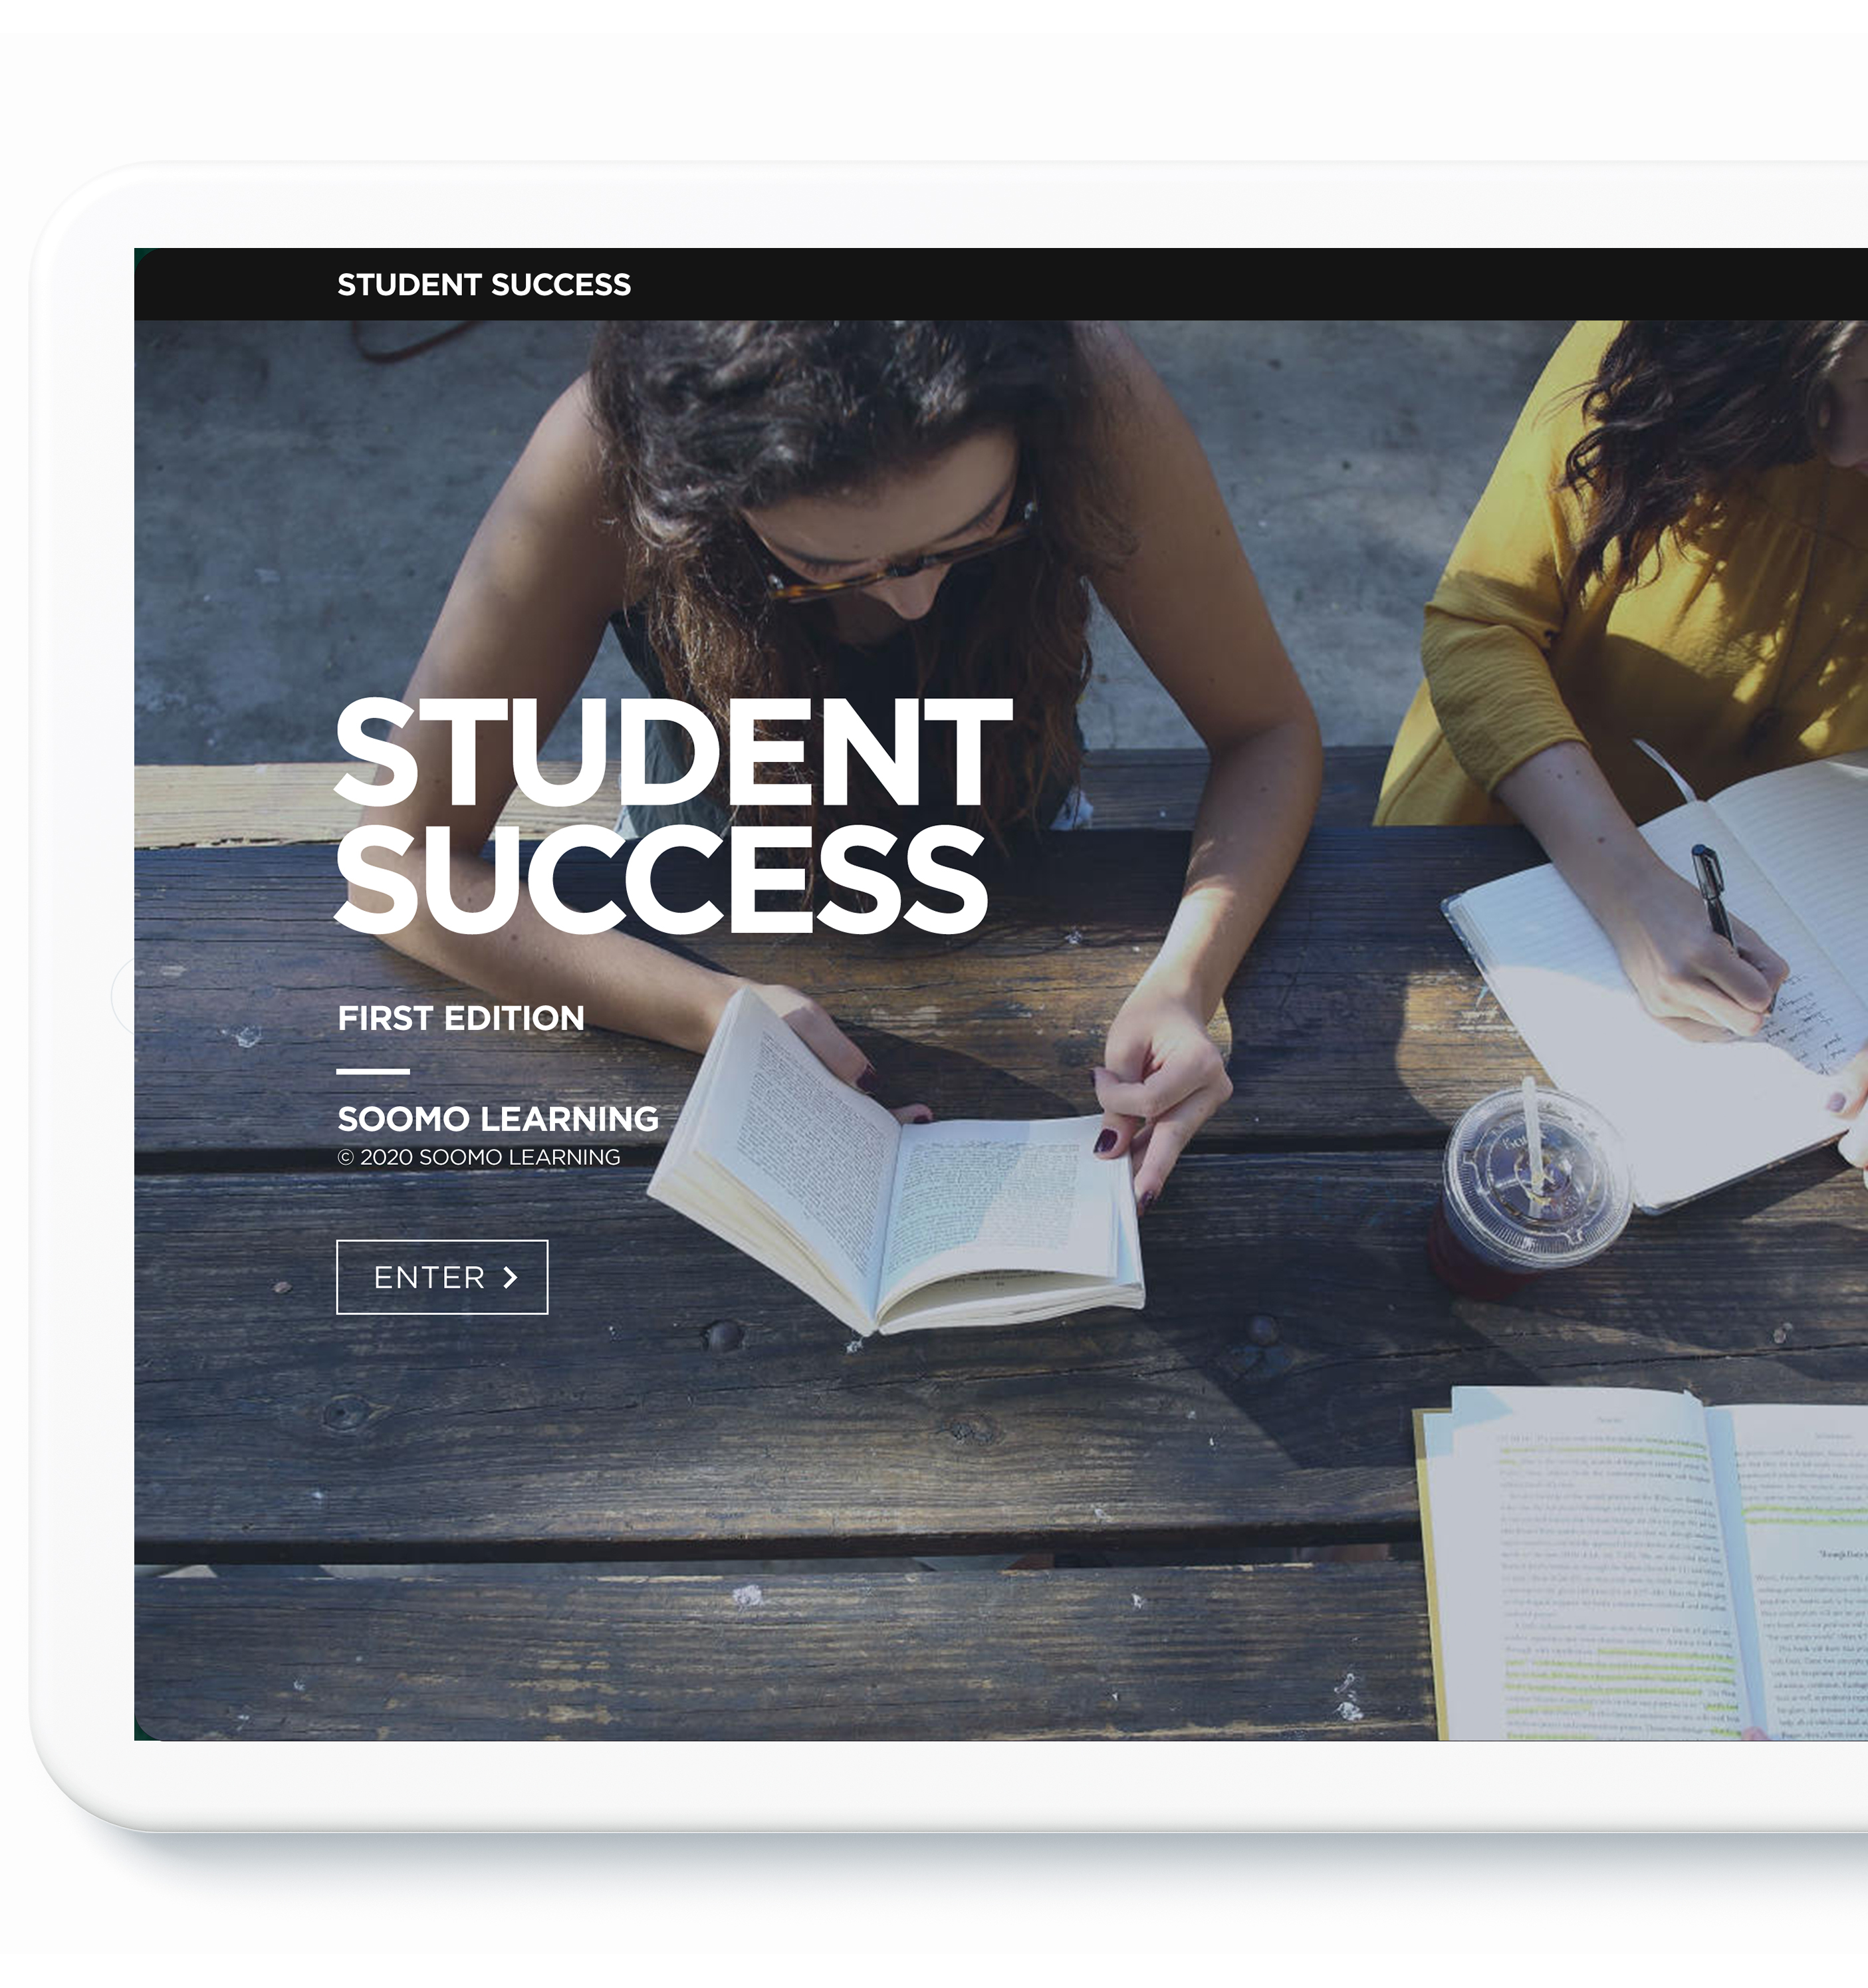 Tablet screen displaying Student Success cover